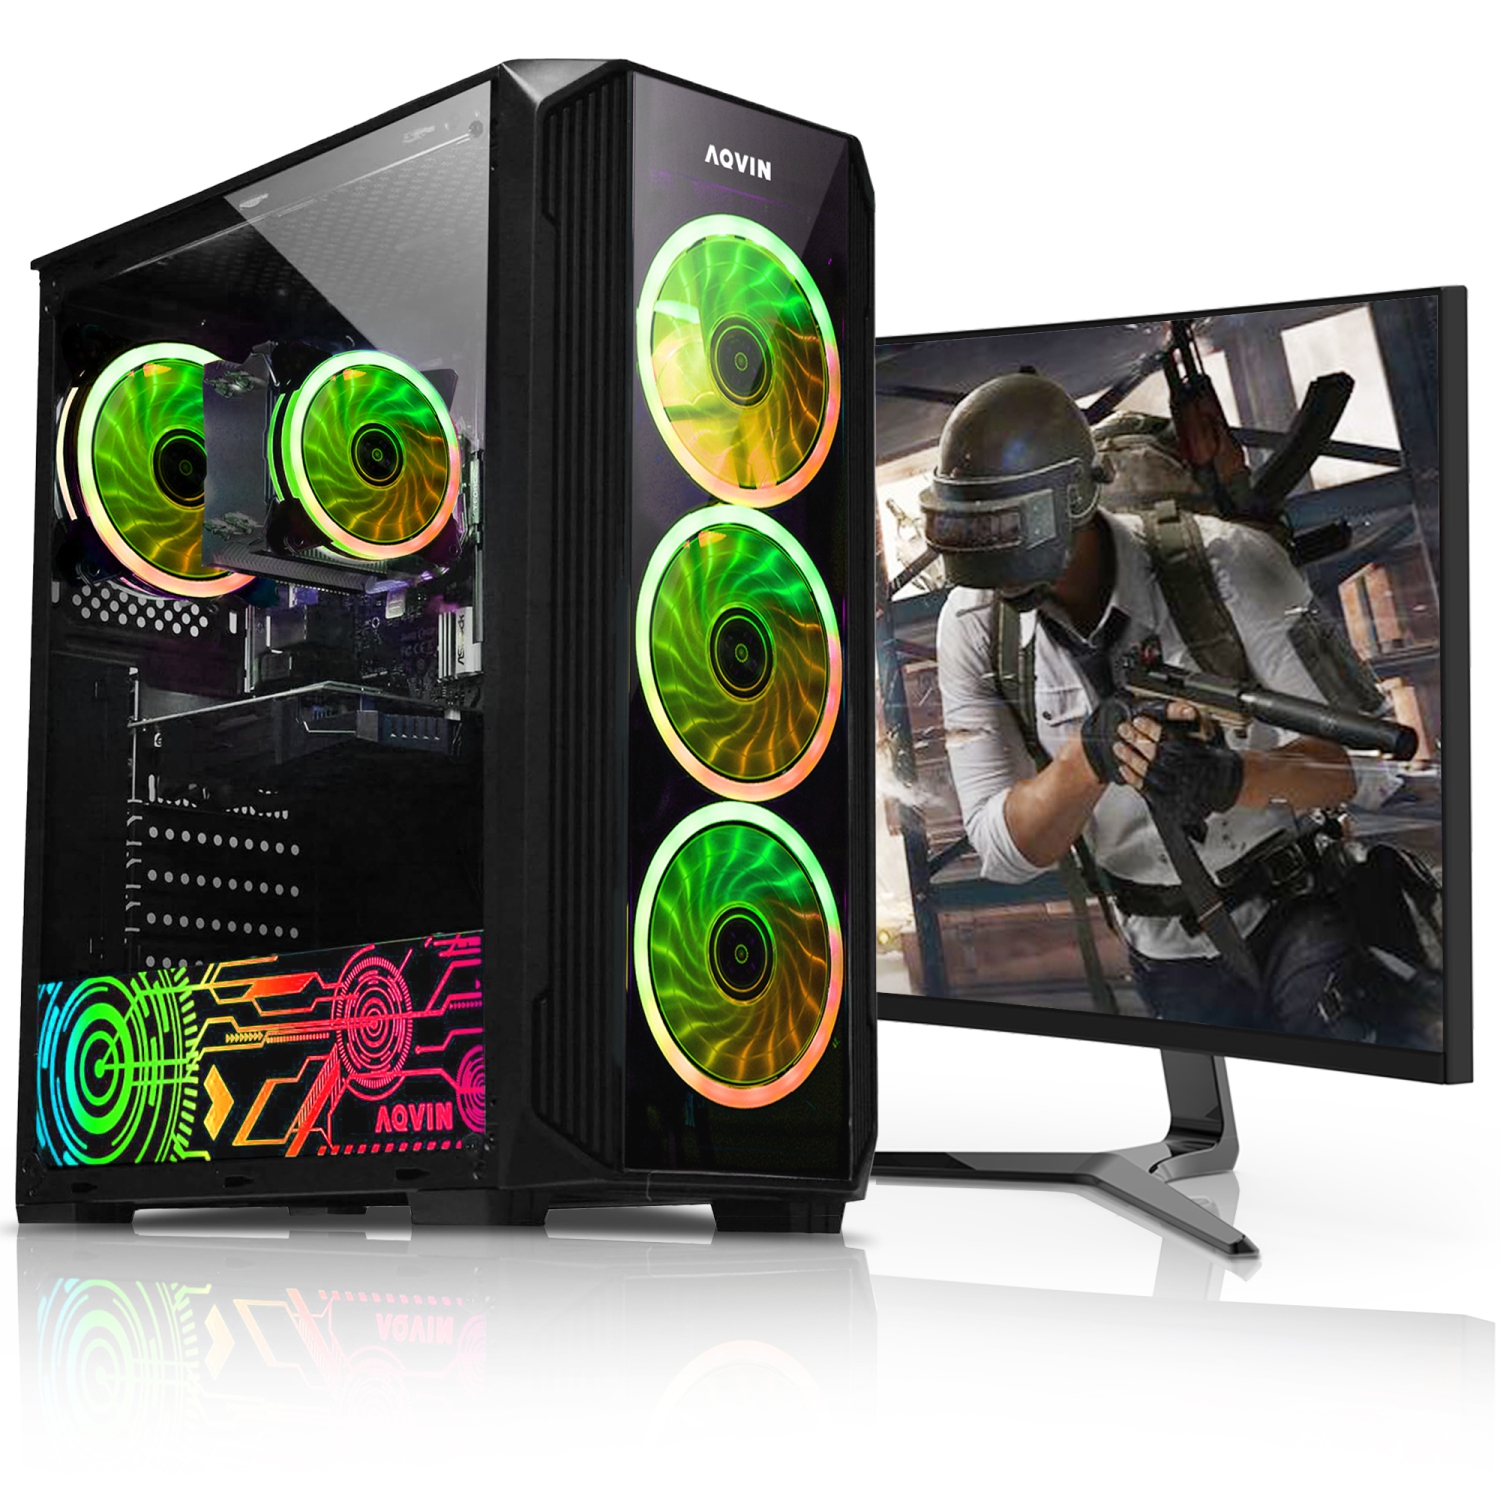 Refurbished (Excellent) - AQVIN ZForce Gaming PC Combo - New 24-inch Curved Gaming Monitor (Intel Core i7 CPU/ AMD Radeon RX 580 8GB HDMI/ 32GB DDR4 RAM/ 1TB SSD/ Windows 10 Pro)